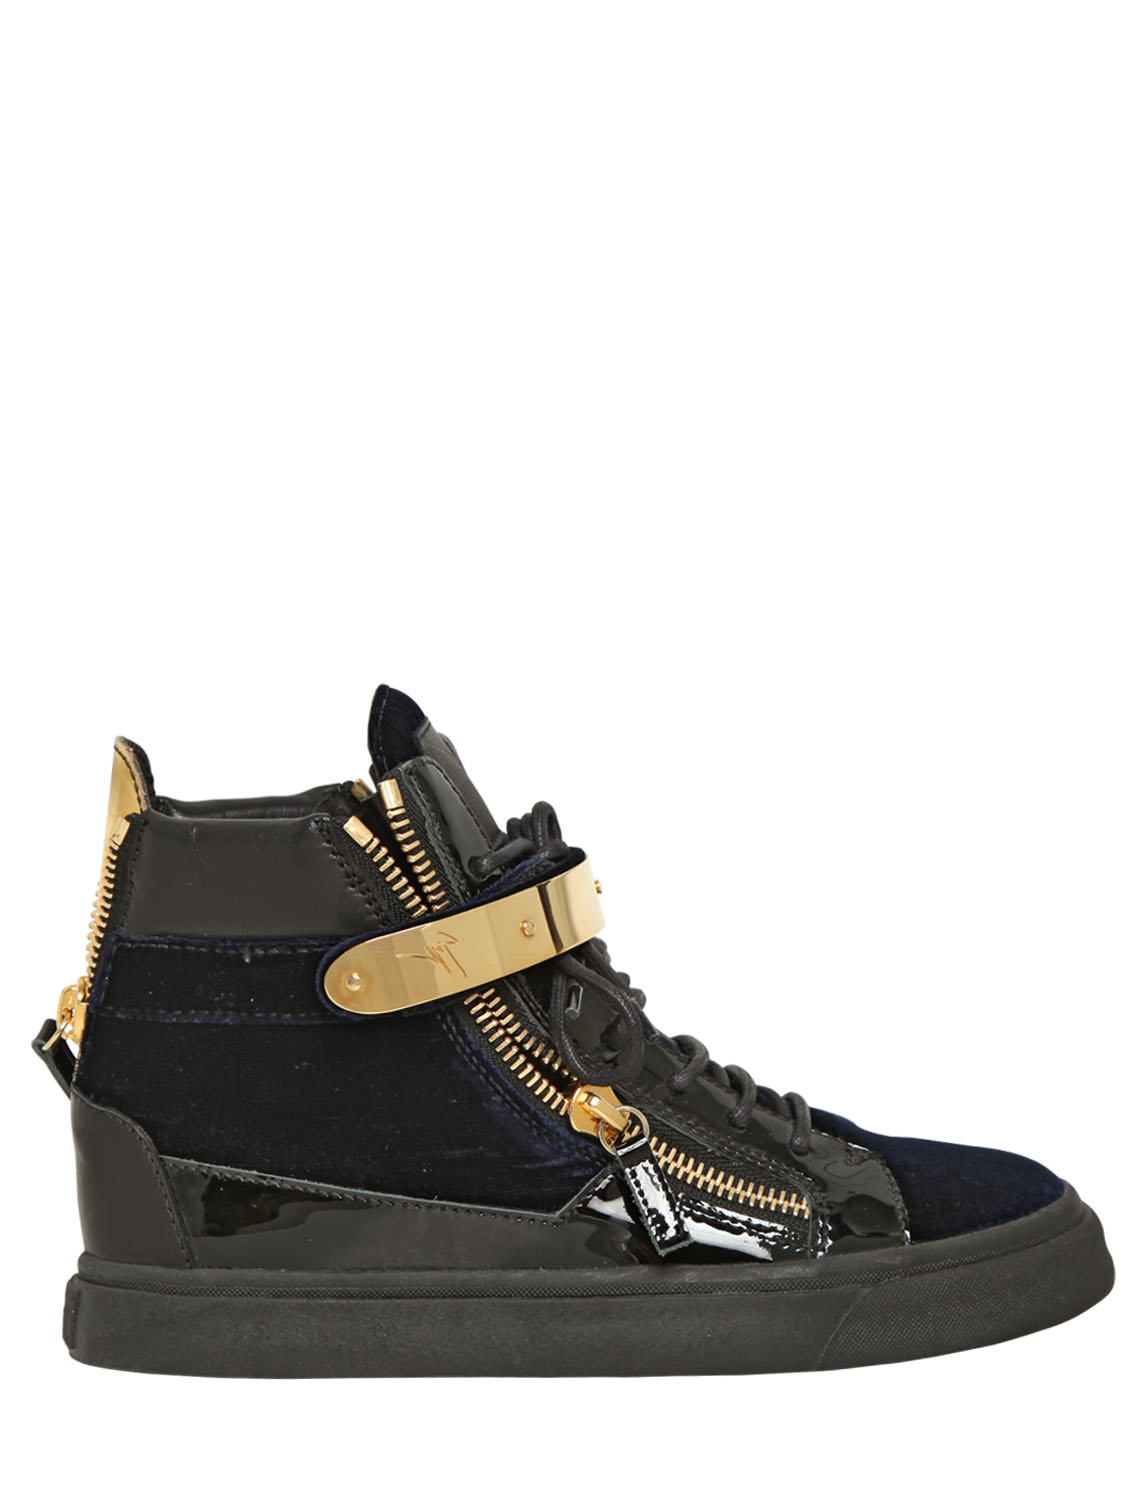 Lyst - Giuseppe Zanotti 20mm Velvet and Patent Leather Sneakers in Blue